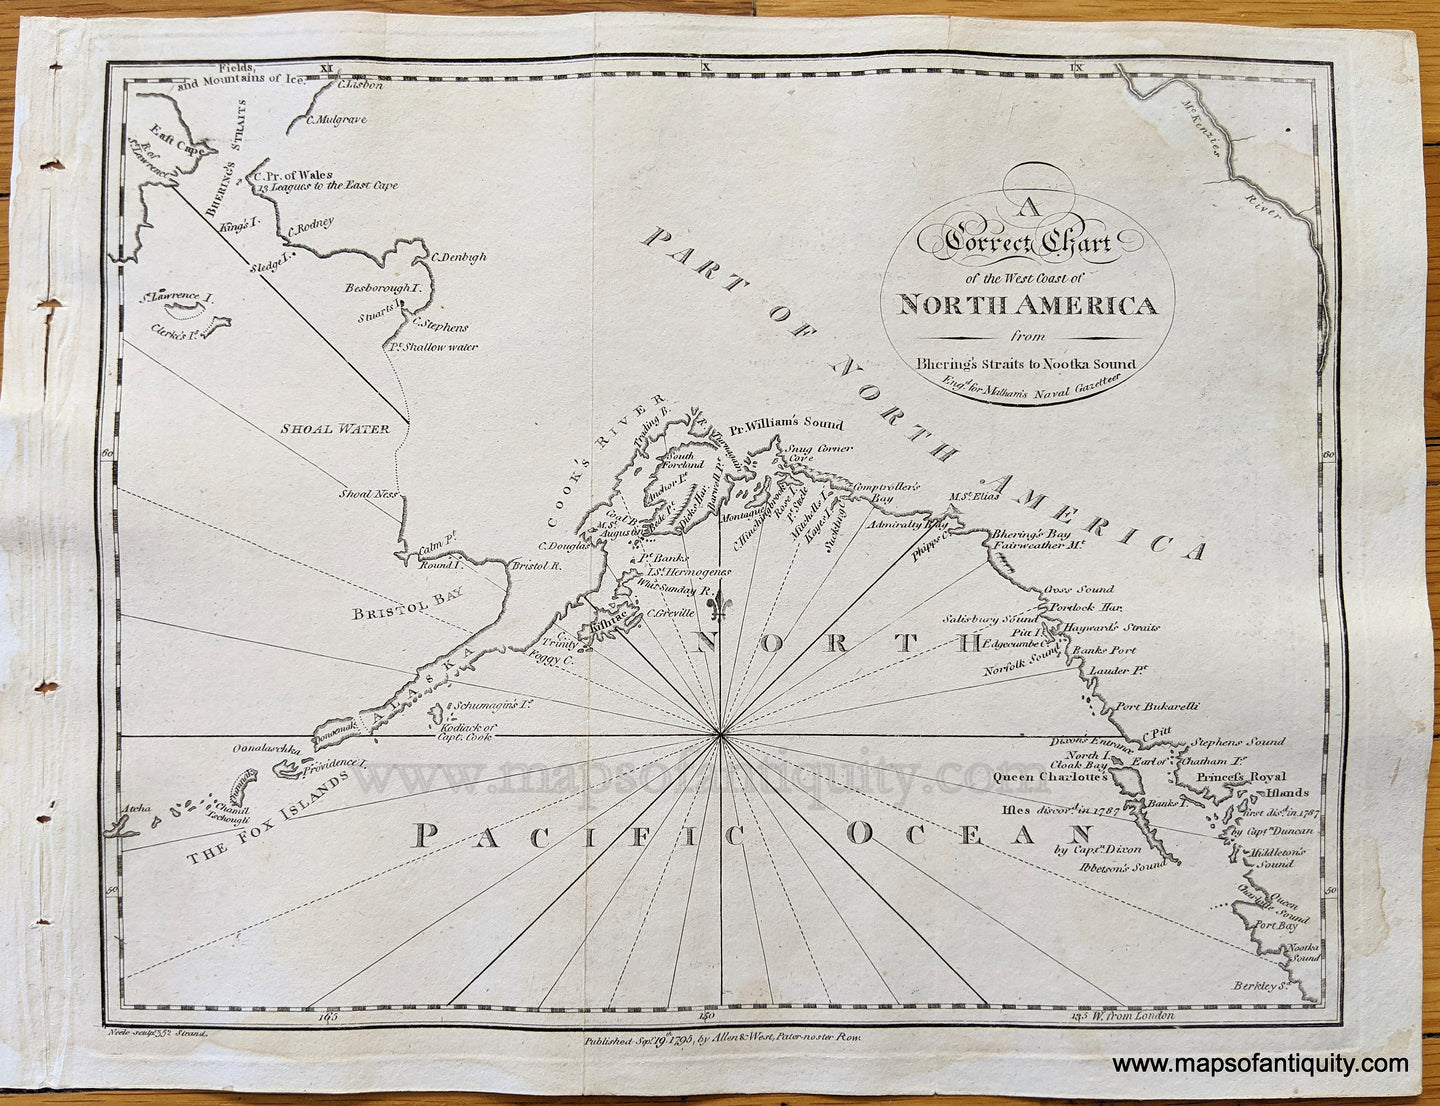 Genuine-Antique-Map-A-Correct-Chart-of-the-West-Coast-of-North-America-from-Bhering's-Straits-to-Nootka-Sound--United-States-West-1795-Malham's-Naval-Gazetteer-Maps-Of-Antiquity-1800s-19th-century